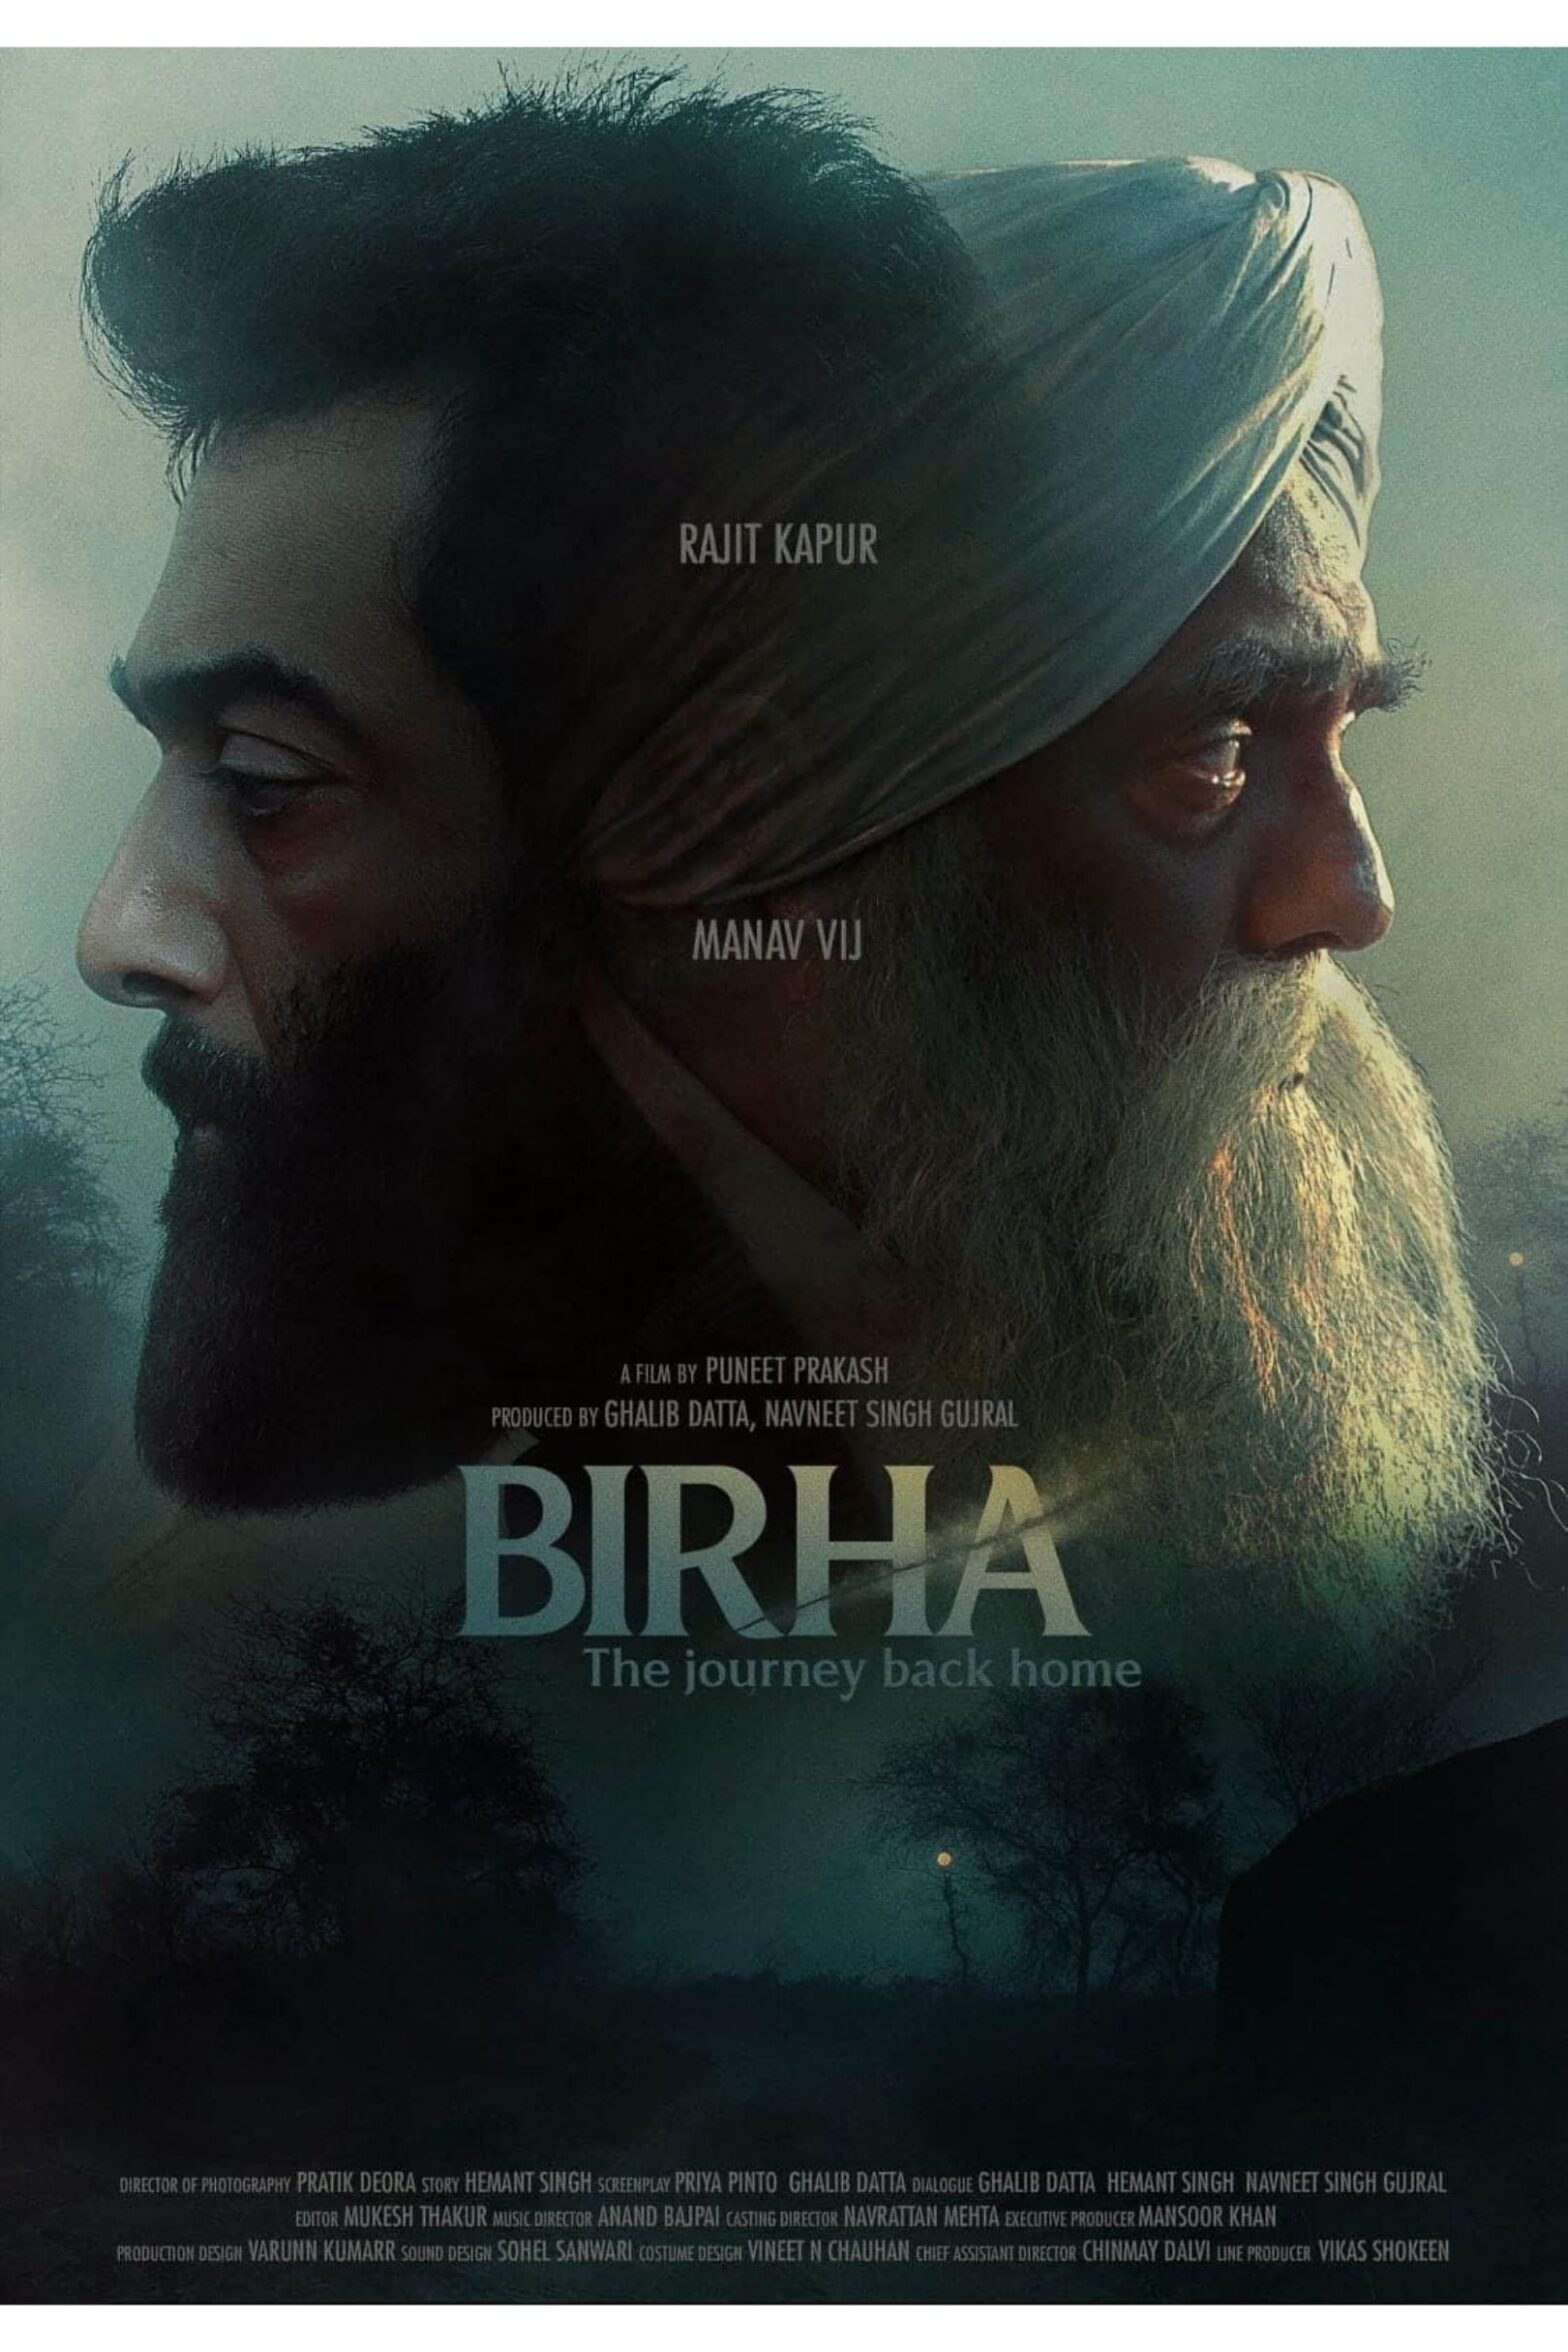 Poster for the movie "Birha : The Journey Back Home"